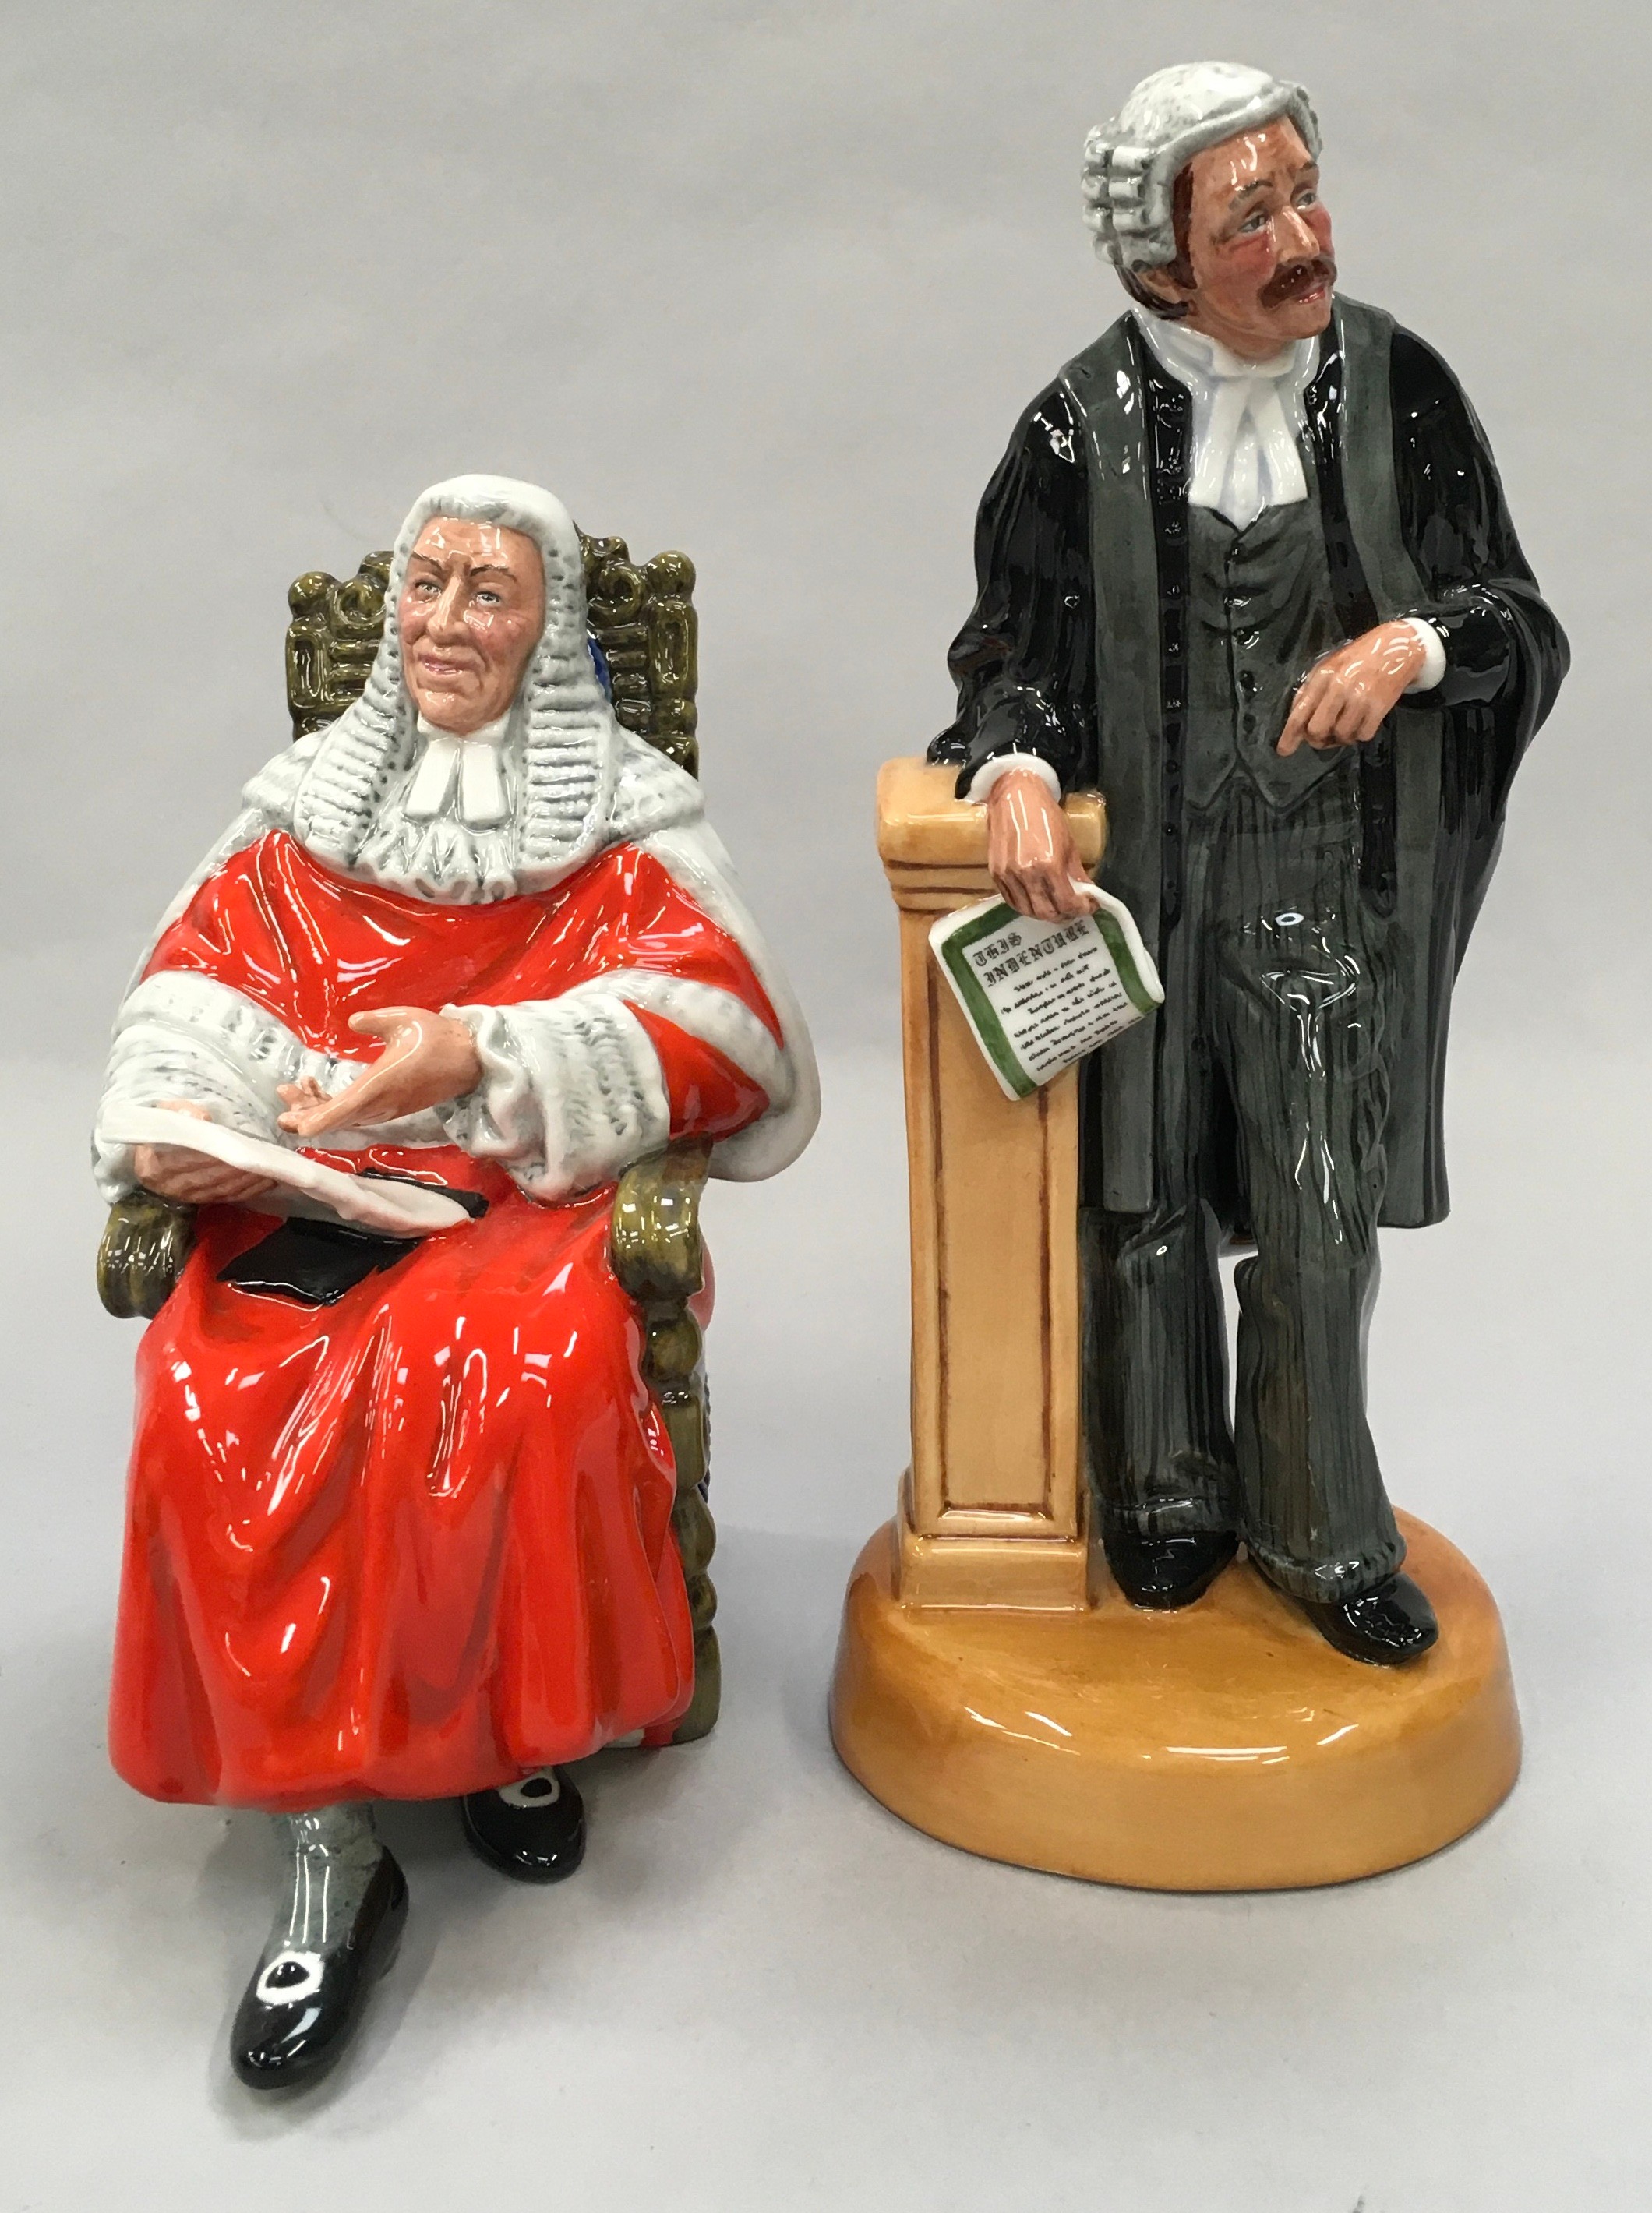 Royal Doulton Figurine The Lawyer HN3041 together with The Judge HN2443, boxed - Image 2 of 6